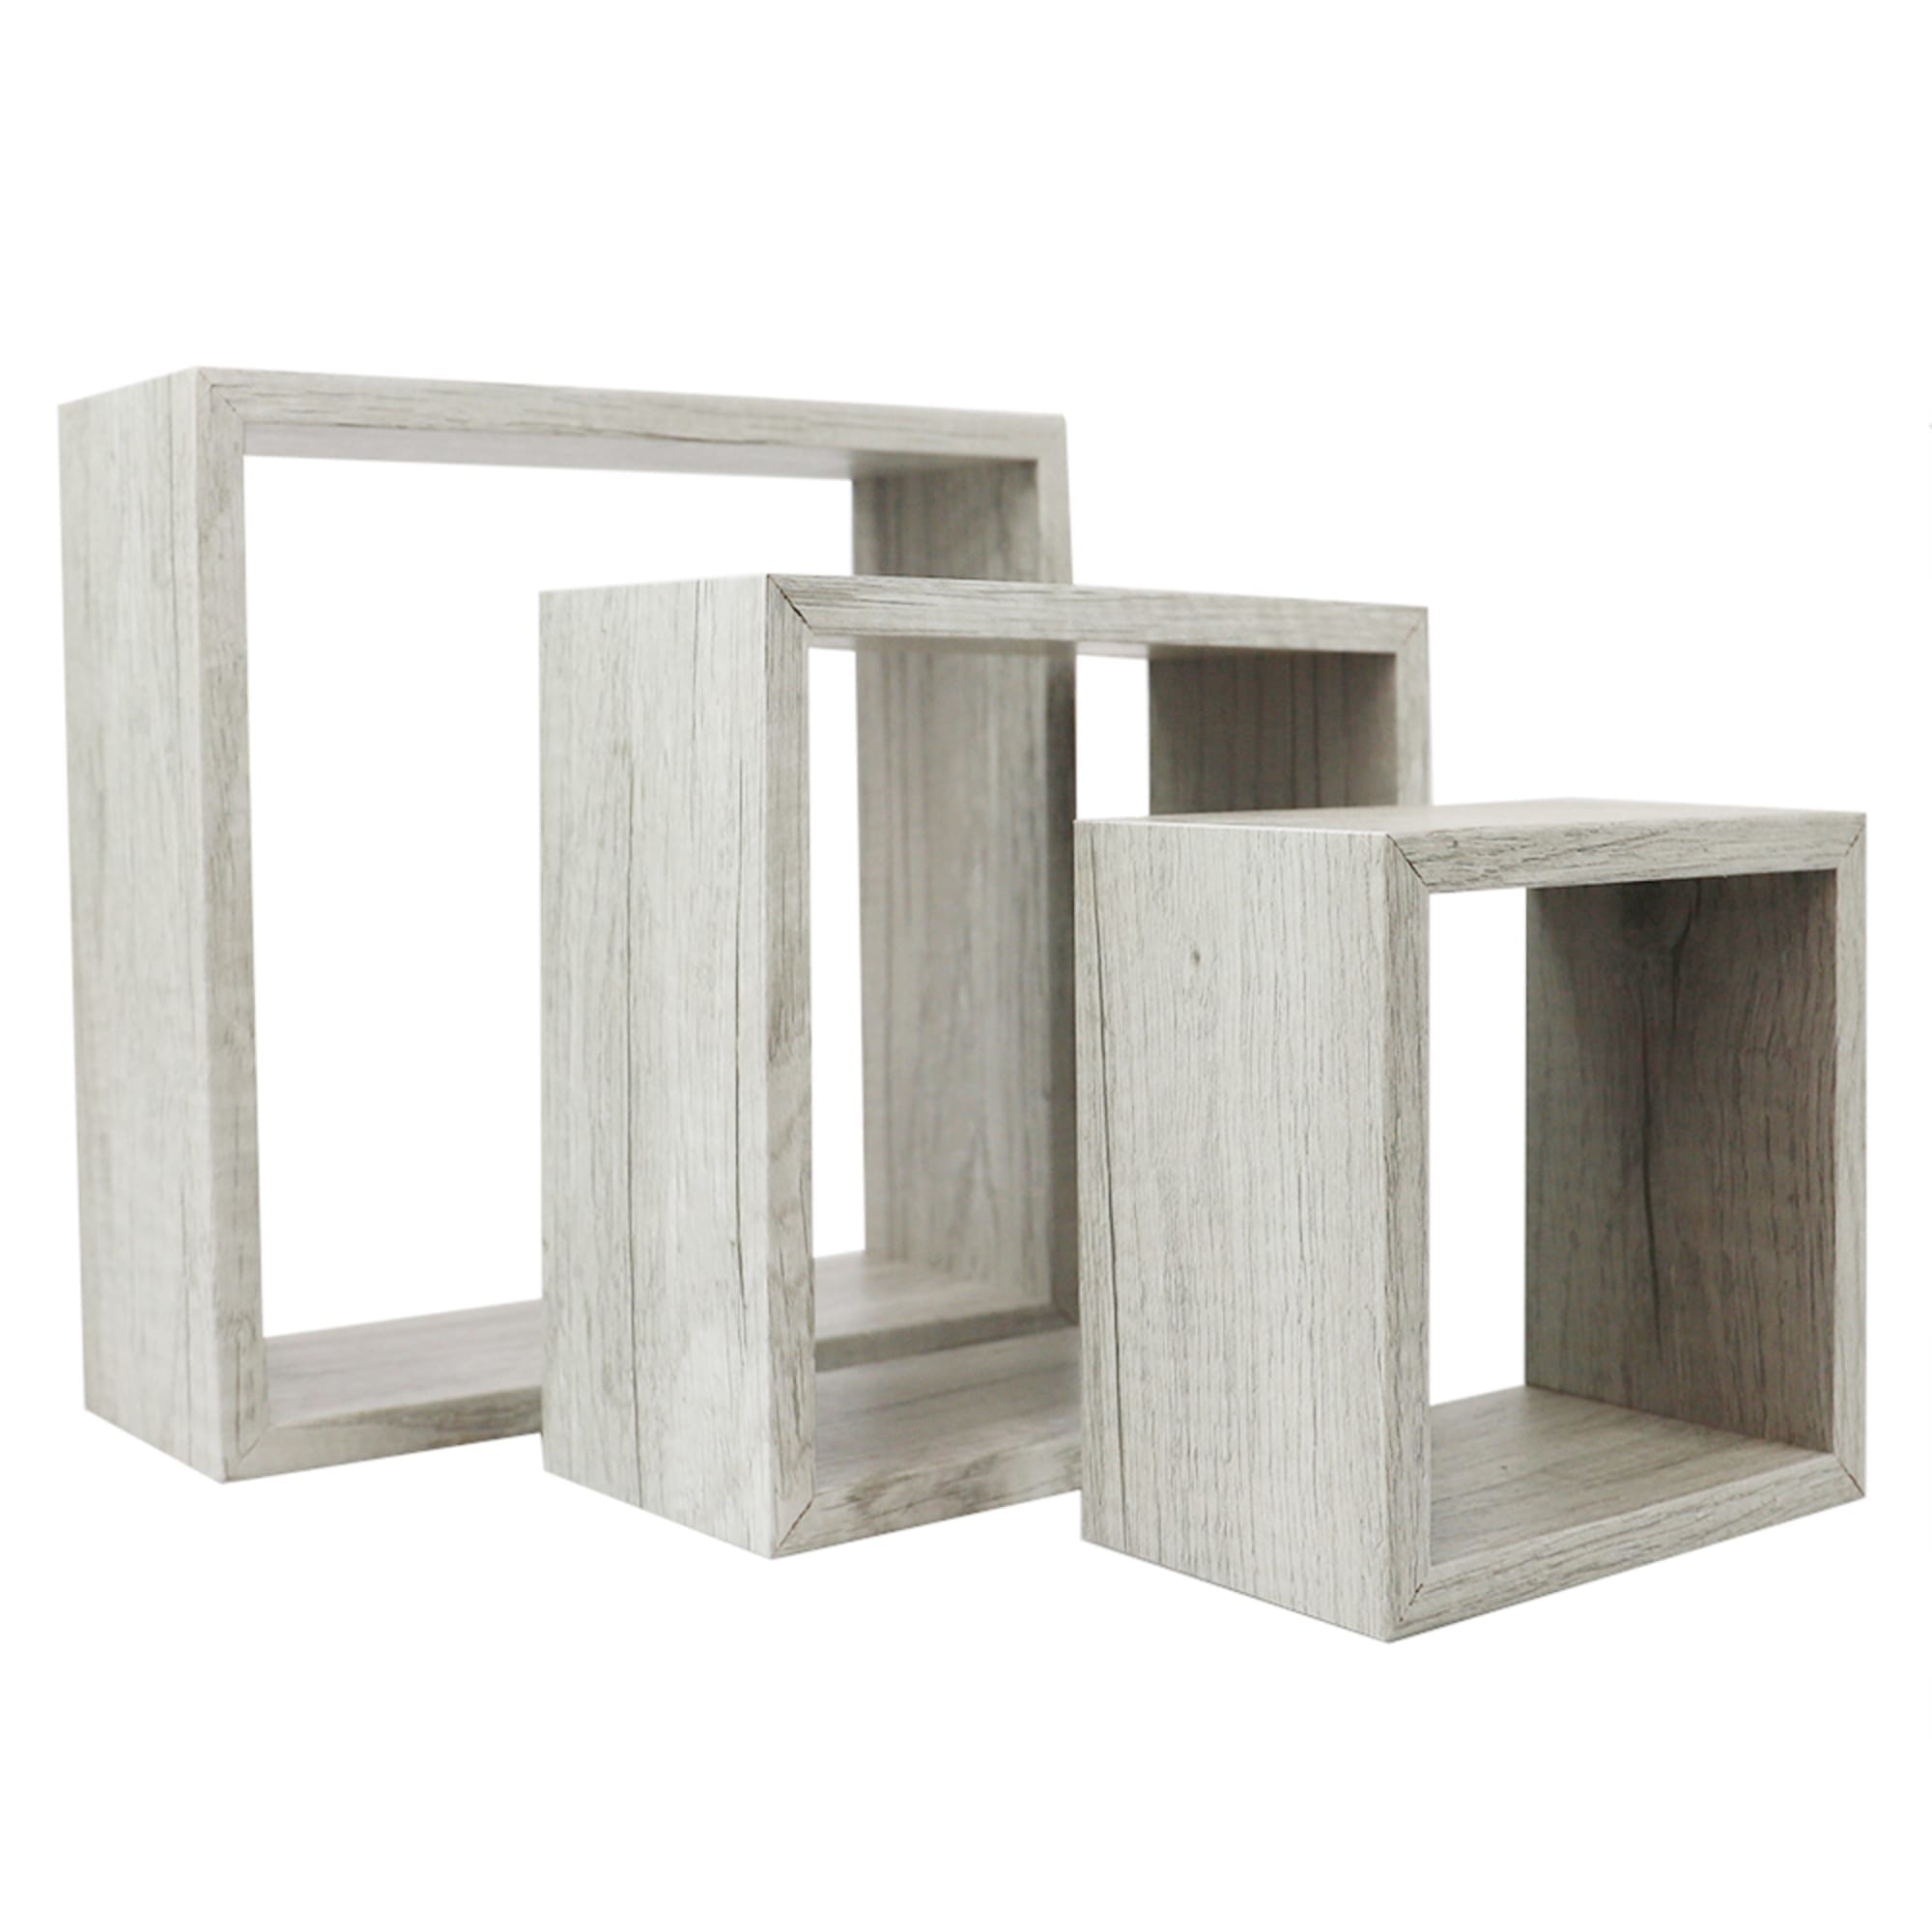 Home Basics 3 Piece MDF Floating Wall Cubes, Grey $12.00 EACH, CASE PACK OF 6